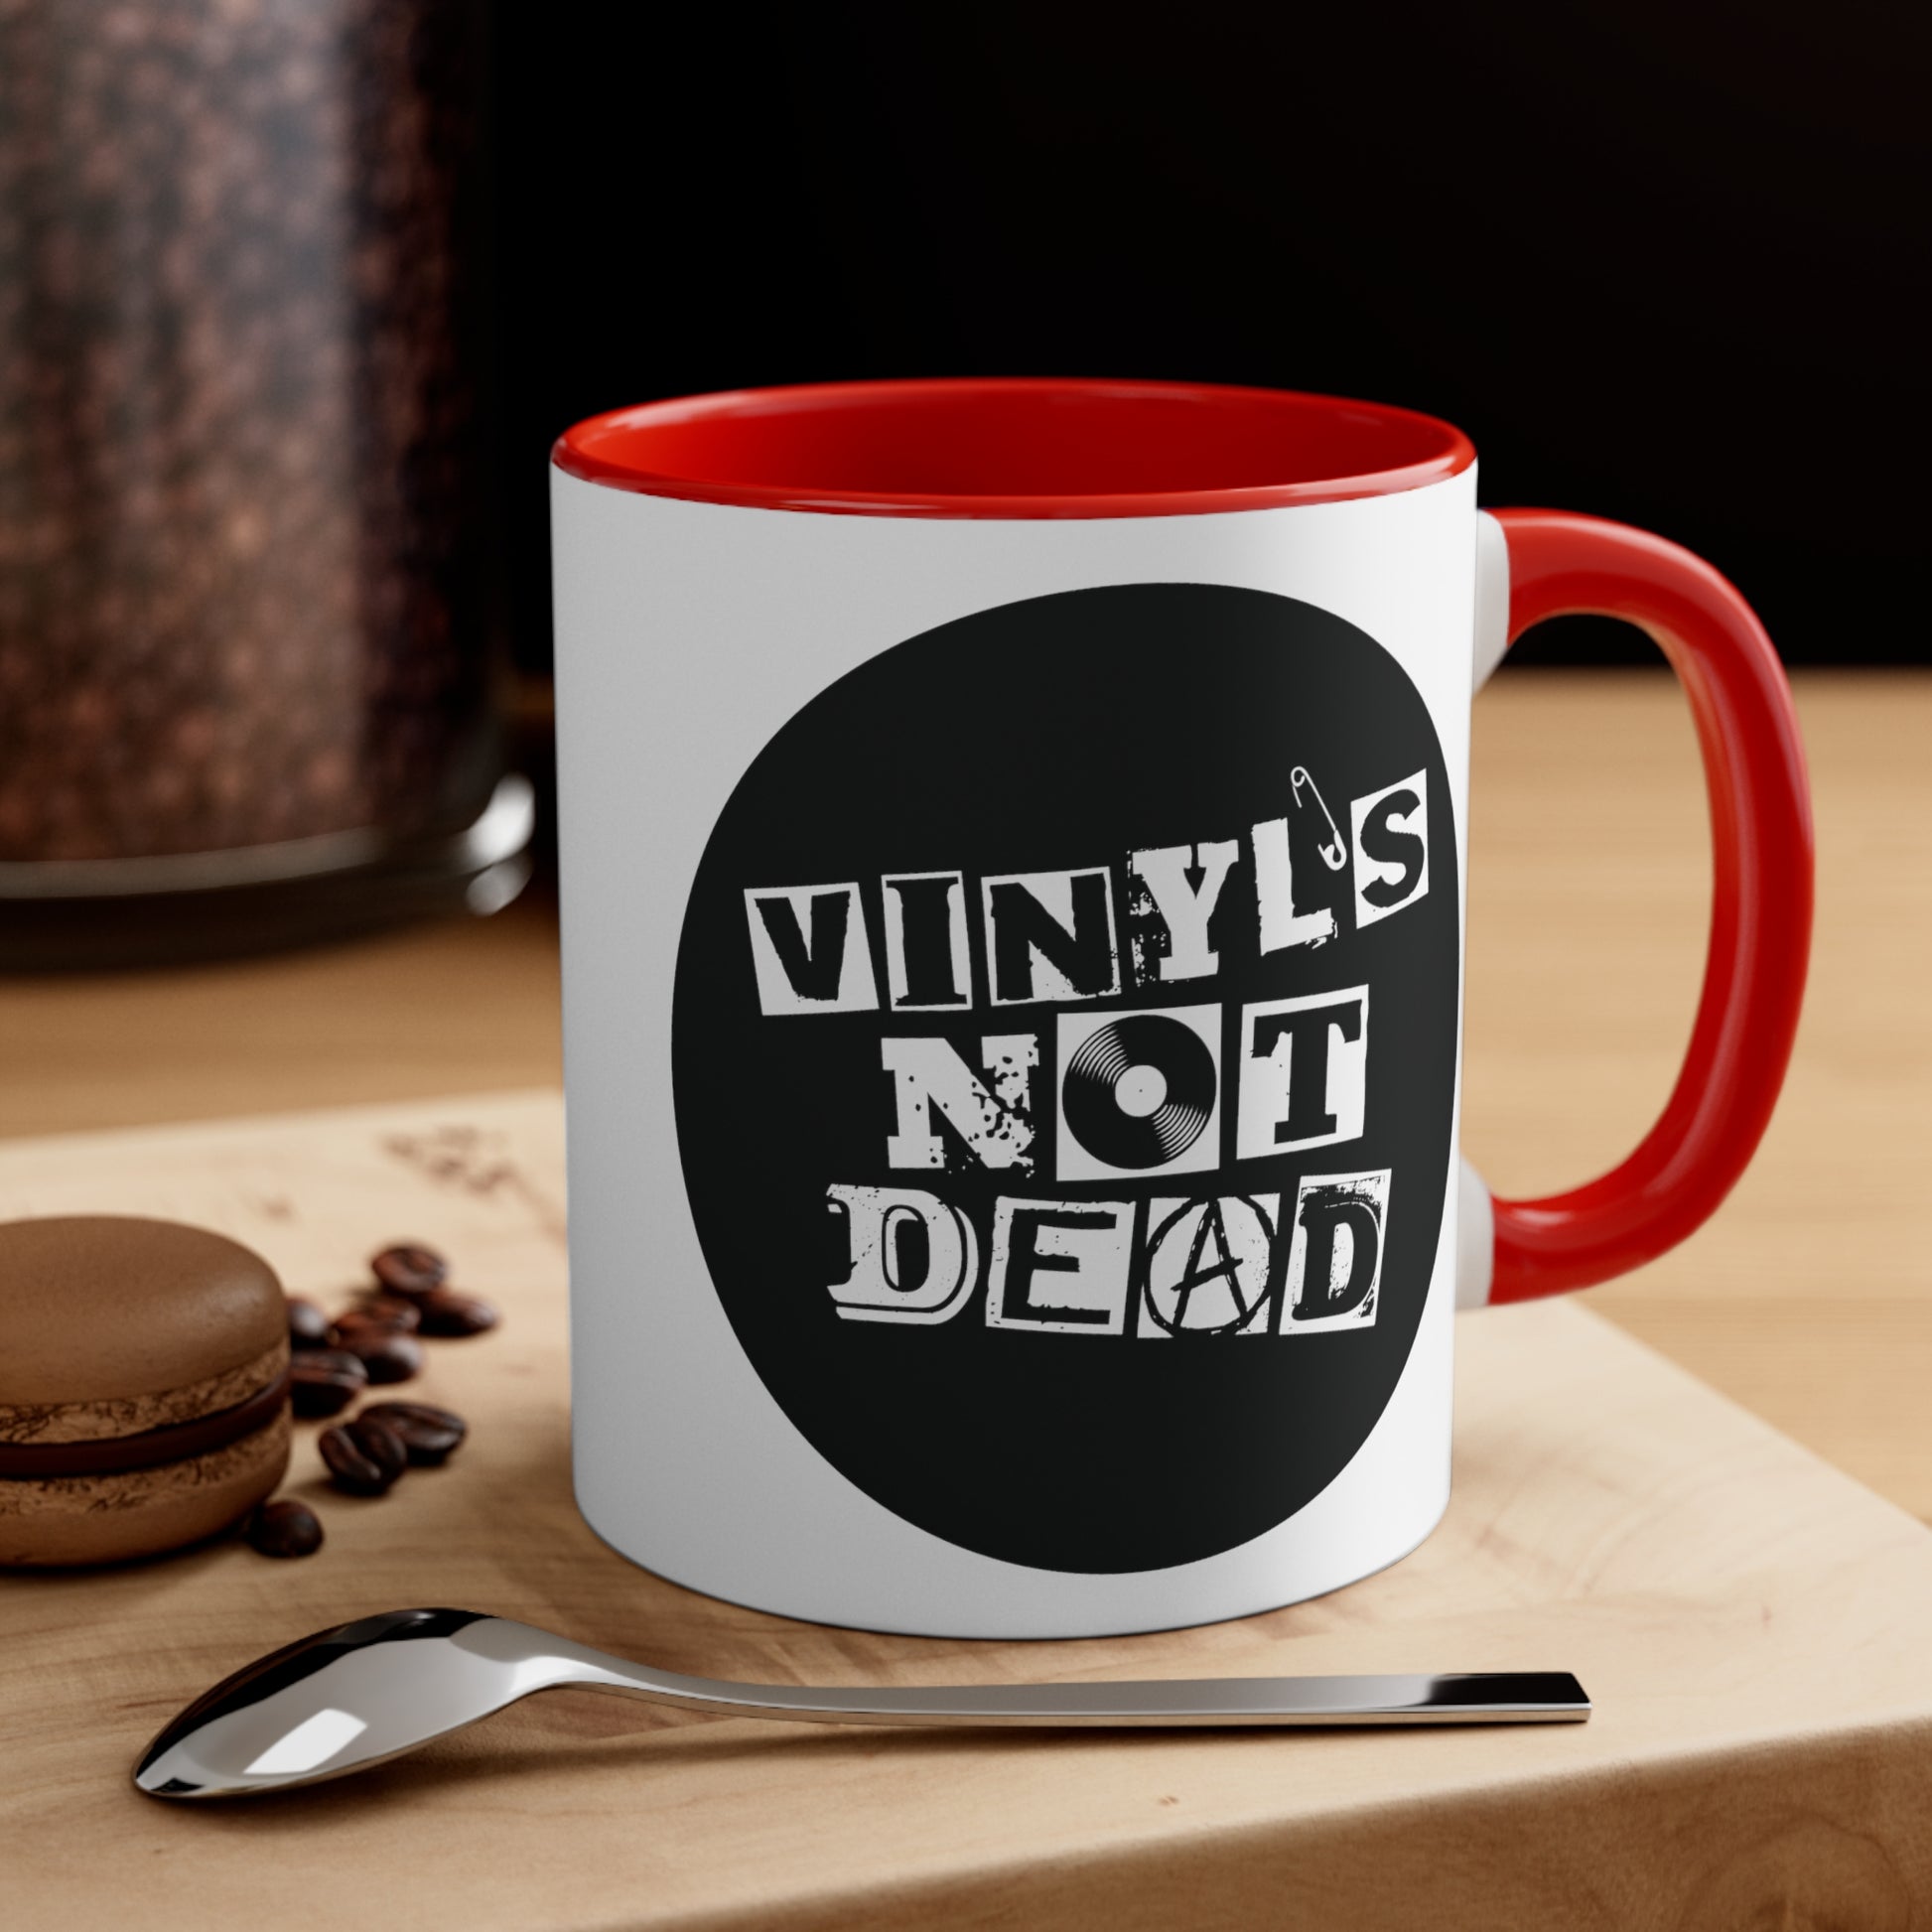 Vinyl Record Themed 11oz Accent Coffee Mug - Vinyl is Not Dead Red